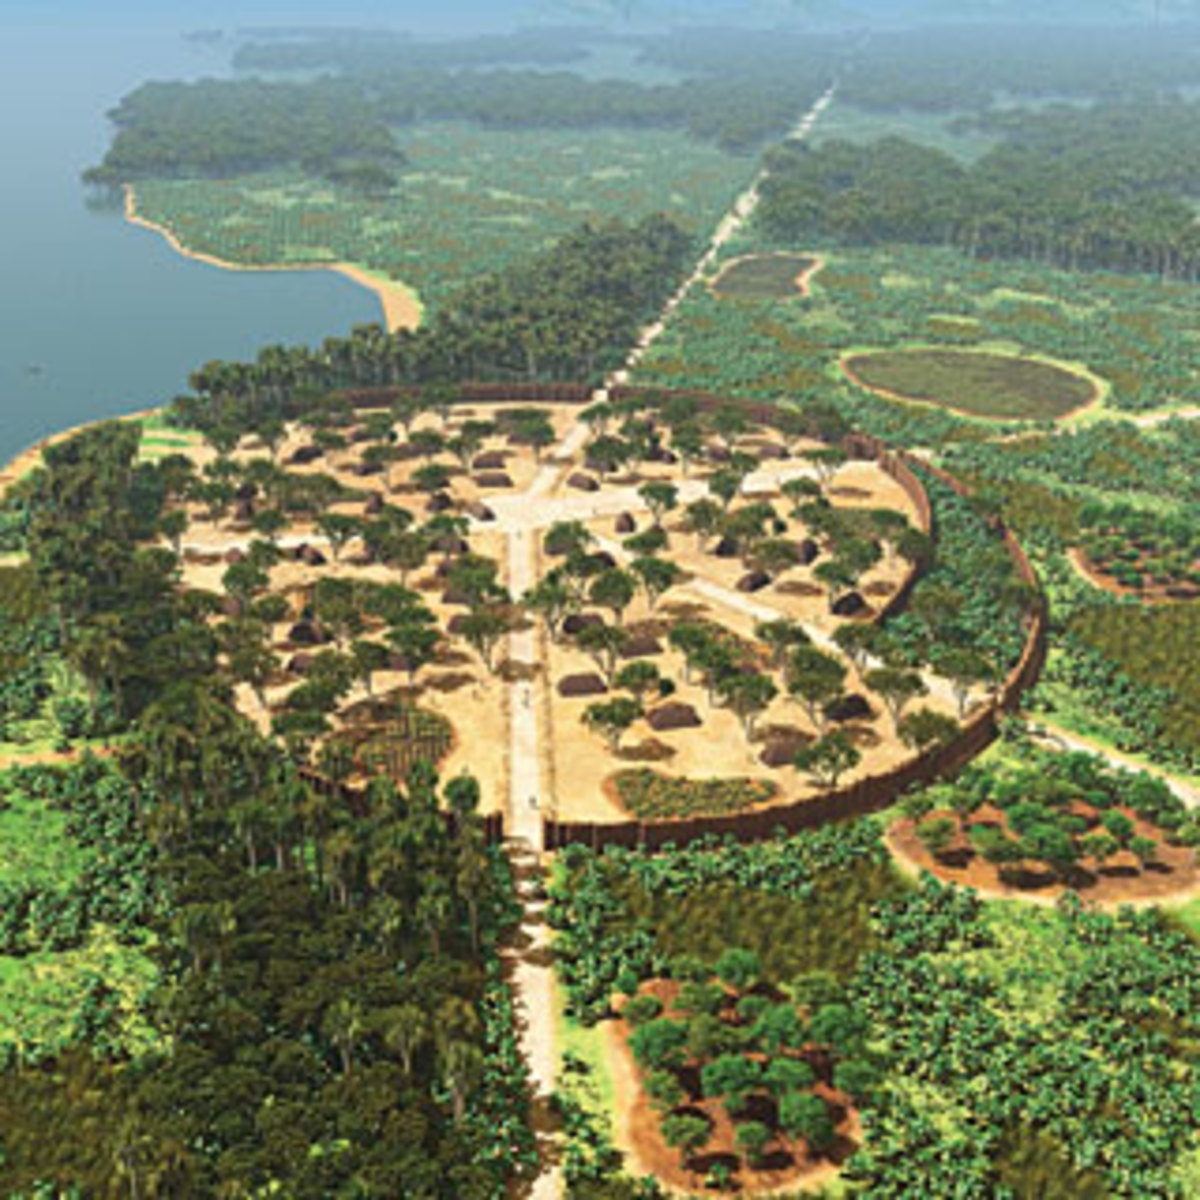 An aerial view of the Kuhikugu site